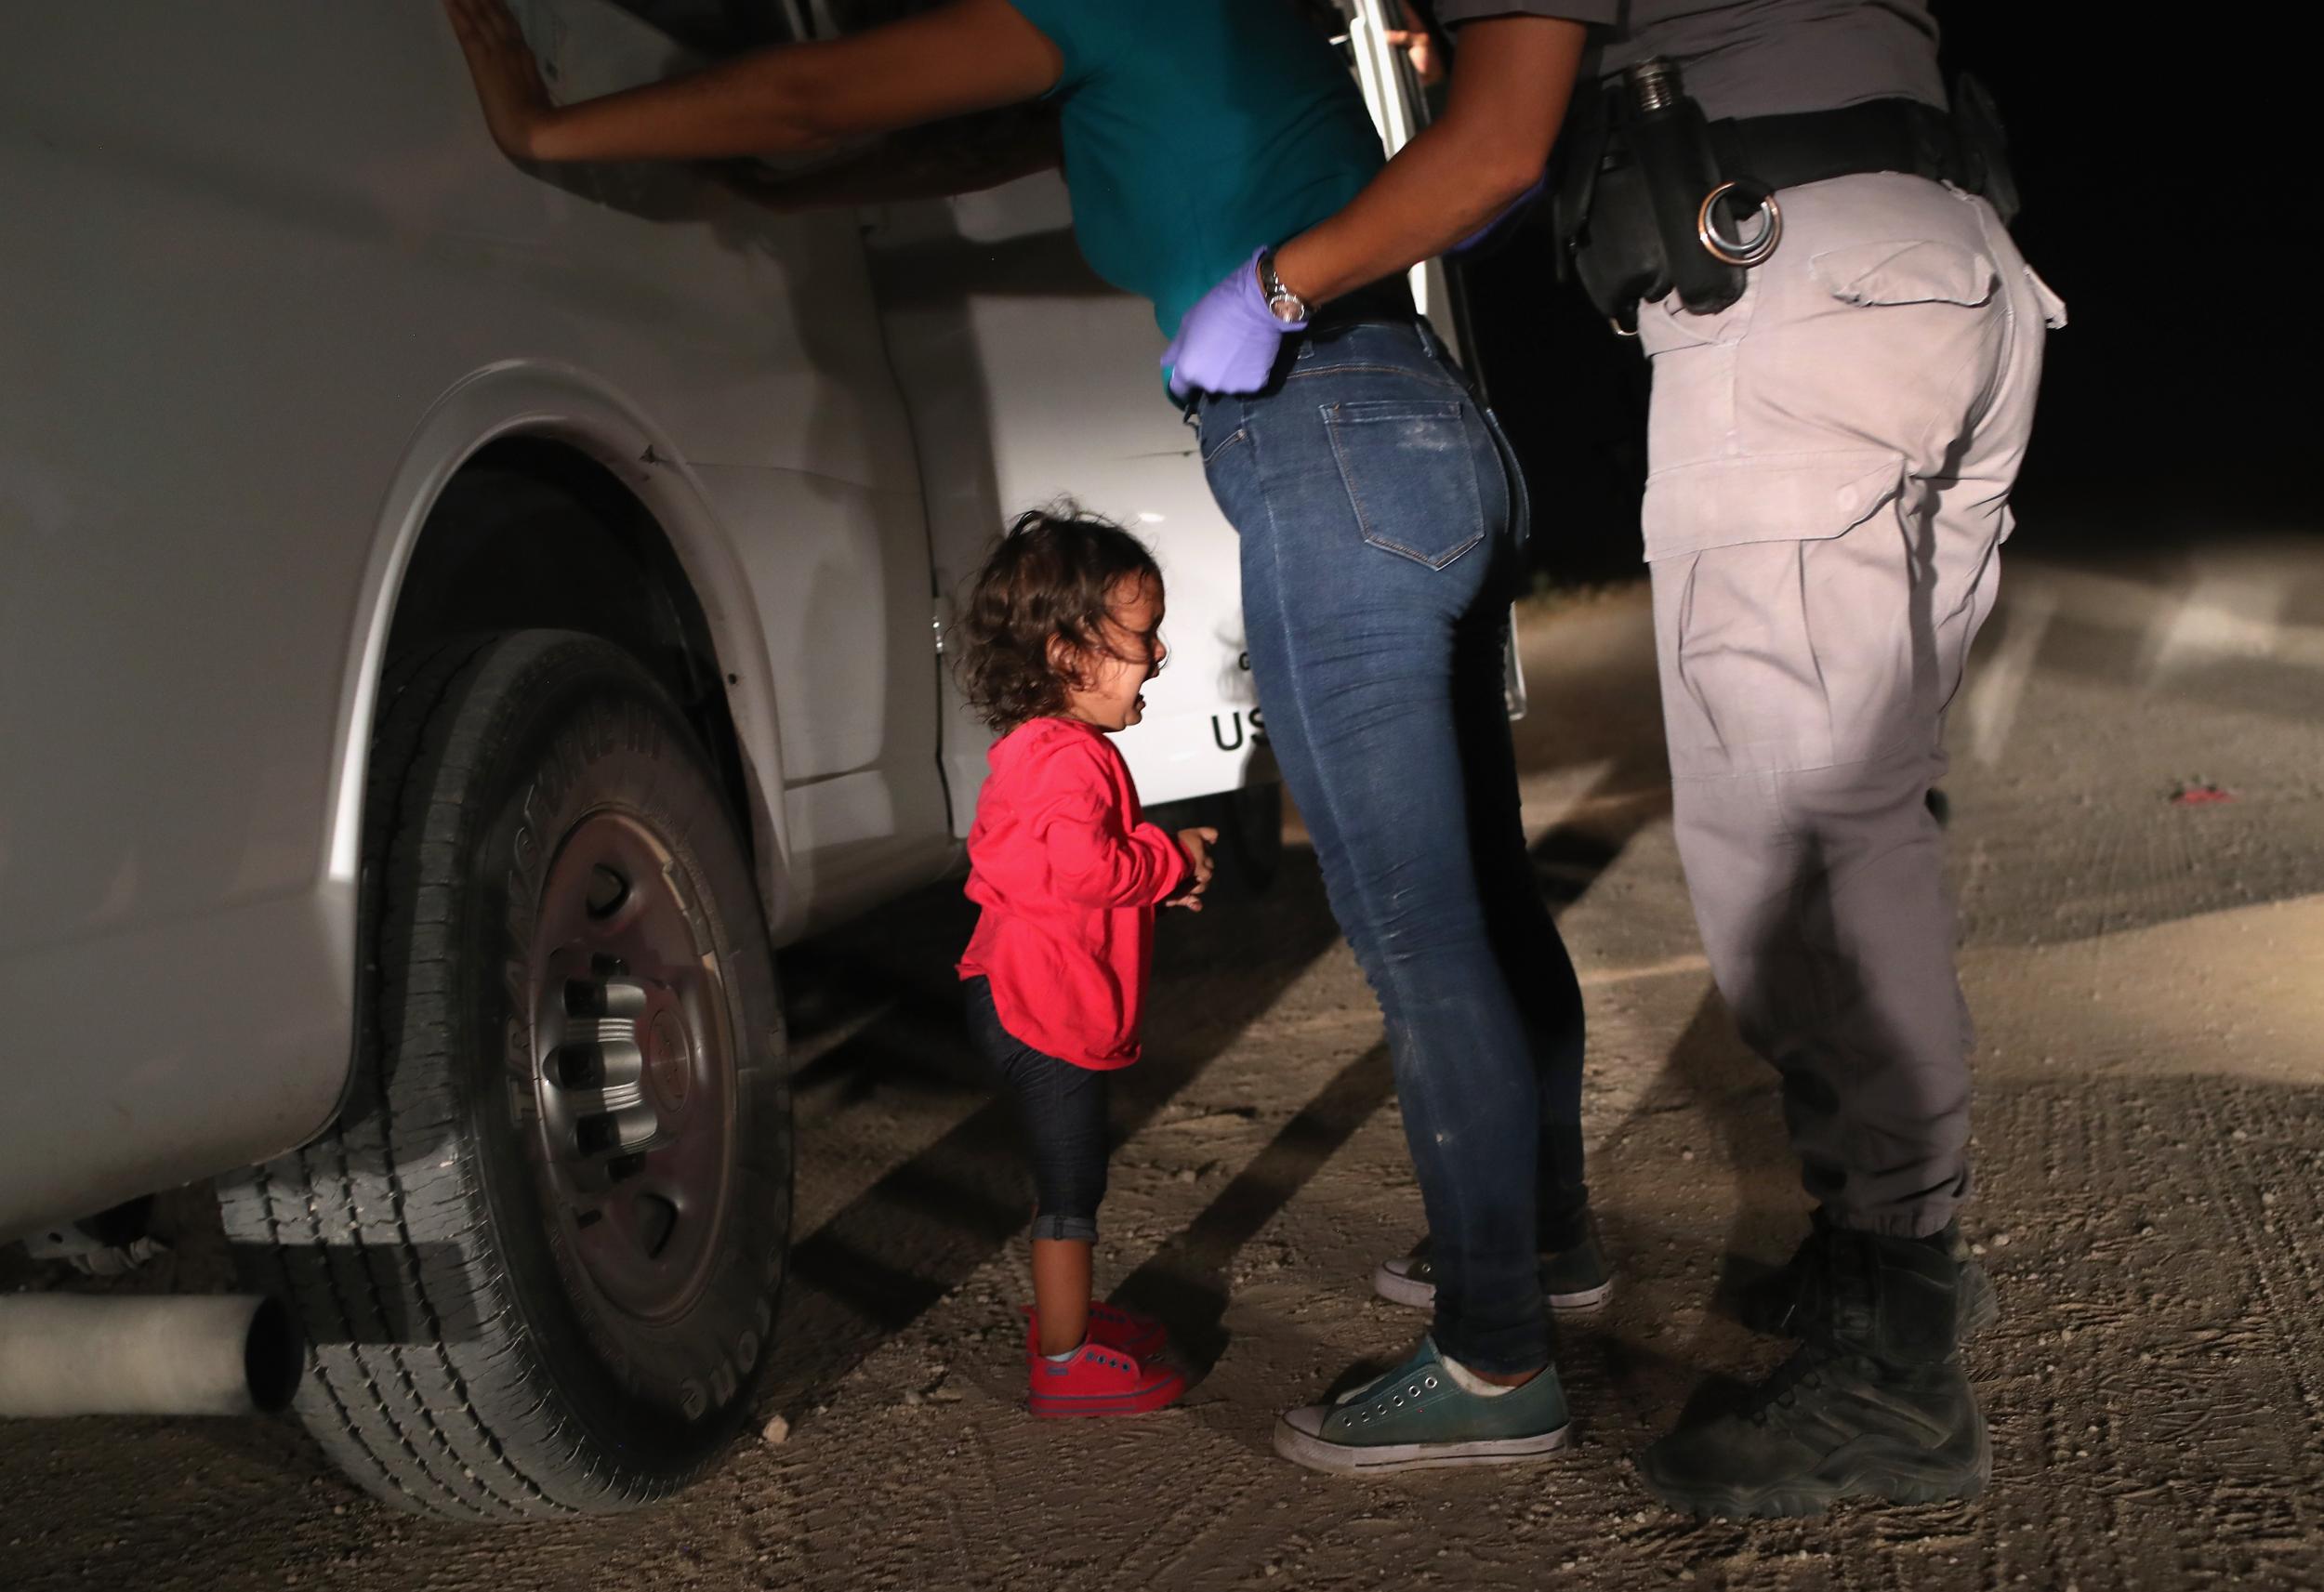 Image result for kid crying cause separated from families at the border, misleading